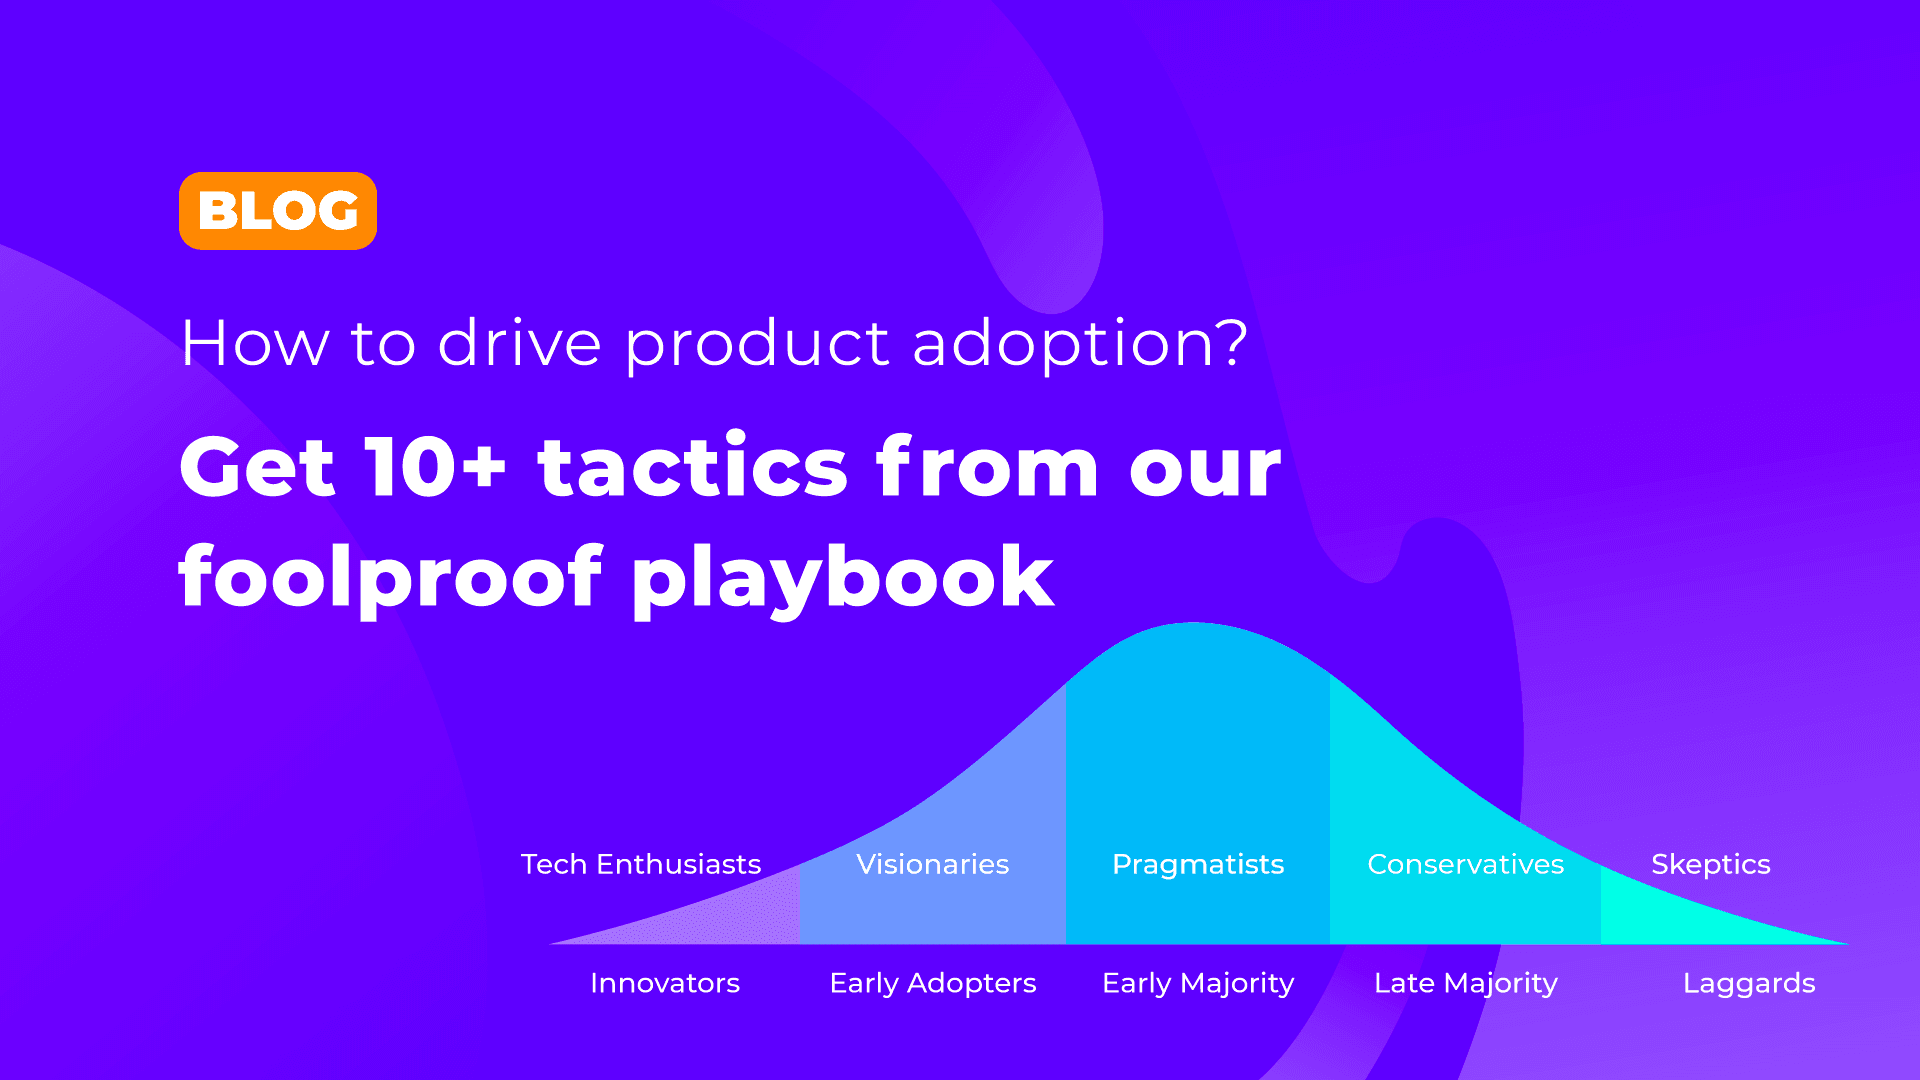 How to drive product adoption? Get 10+ tactics from our foolproof playbook cover